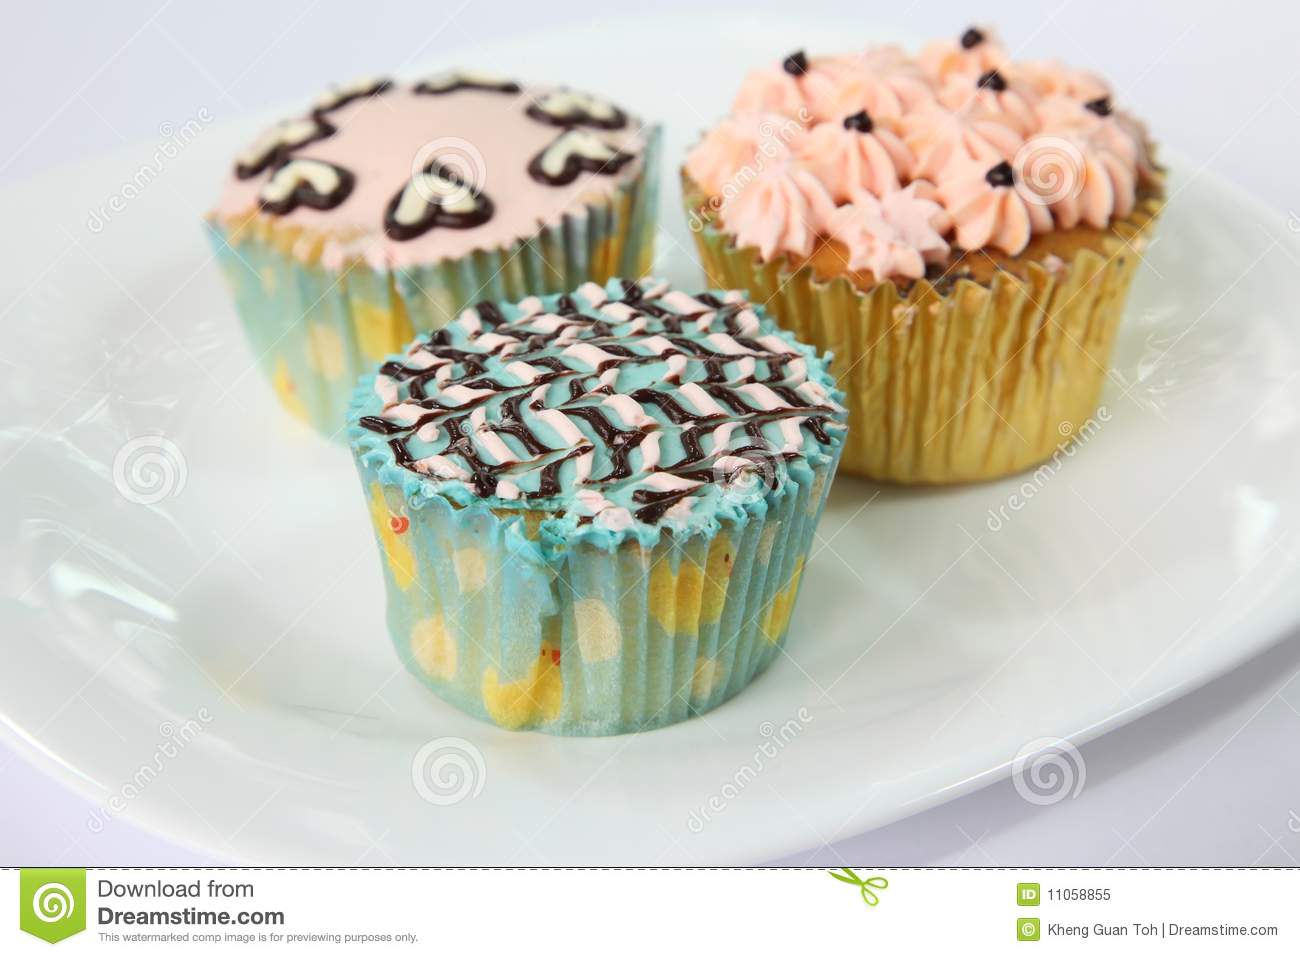 Fancy Decorated Cupcakes